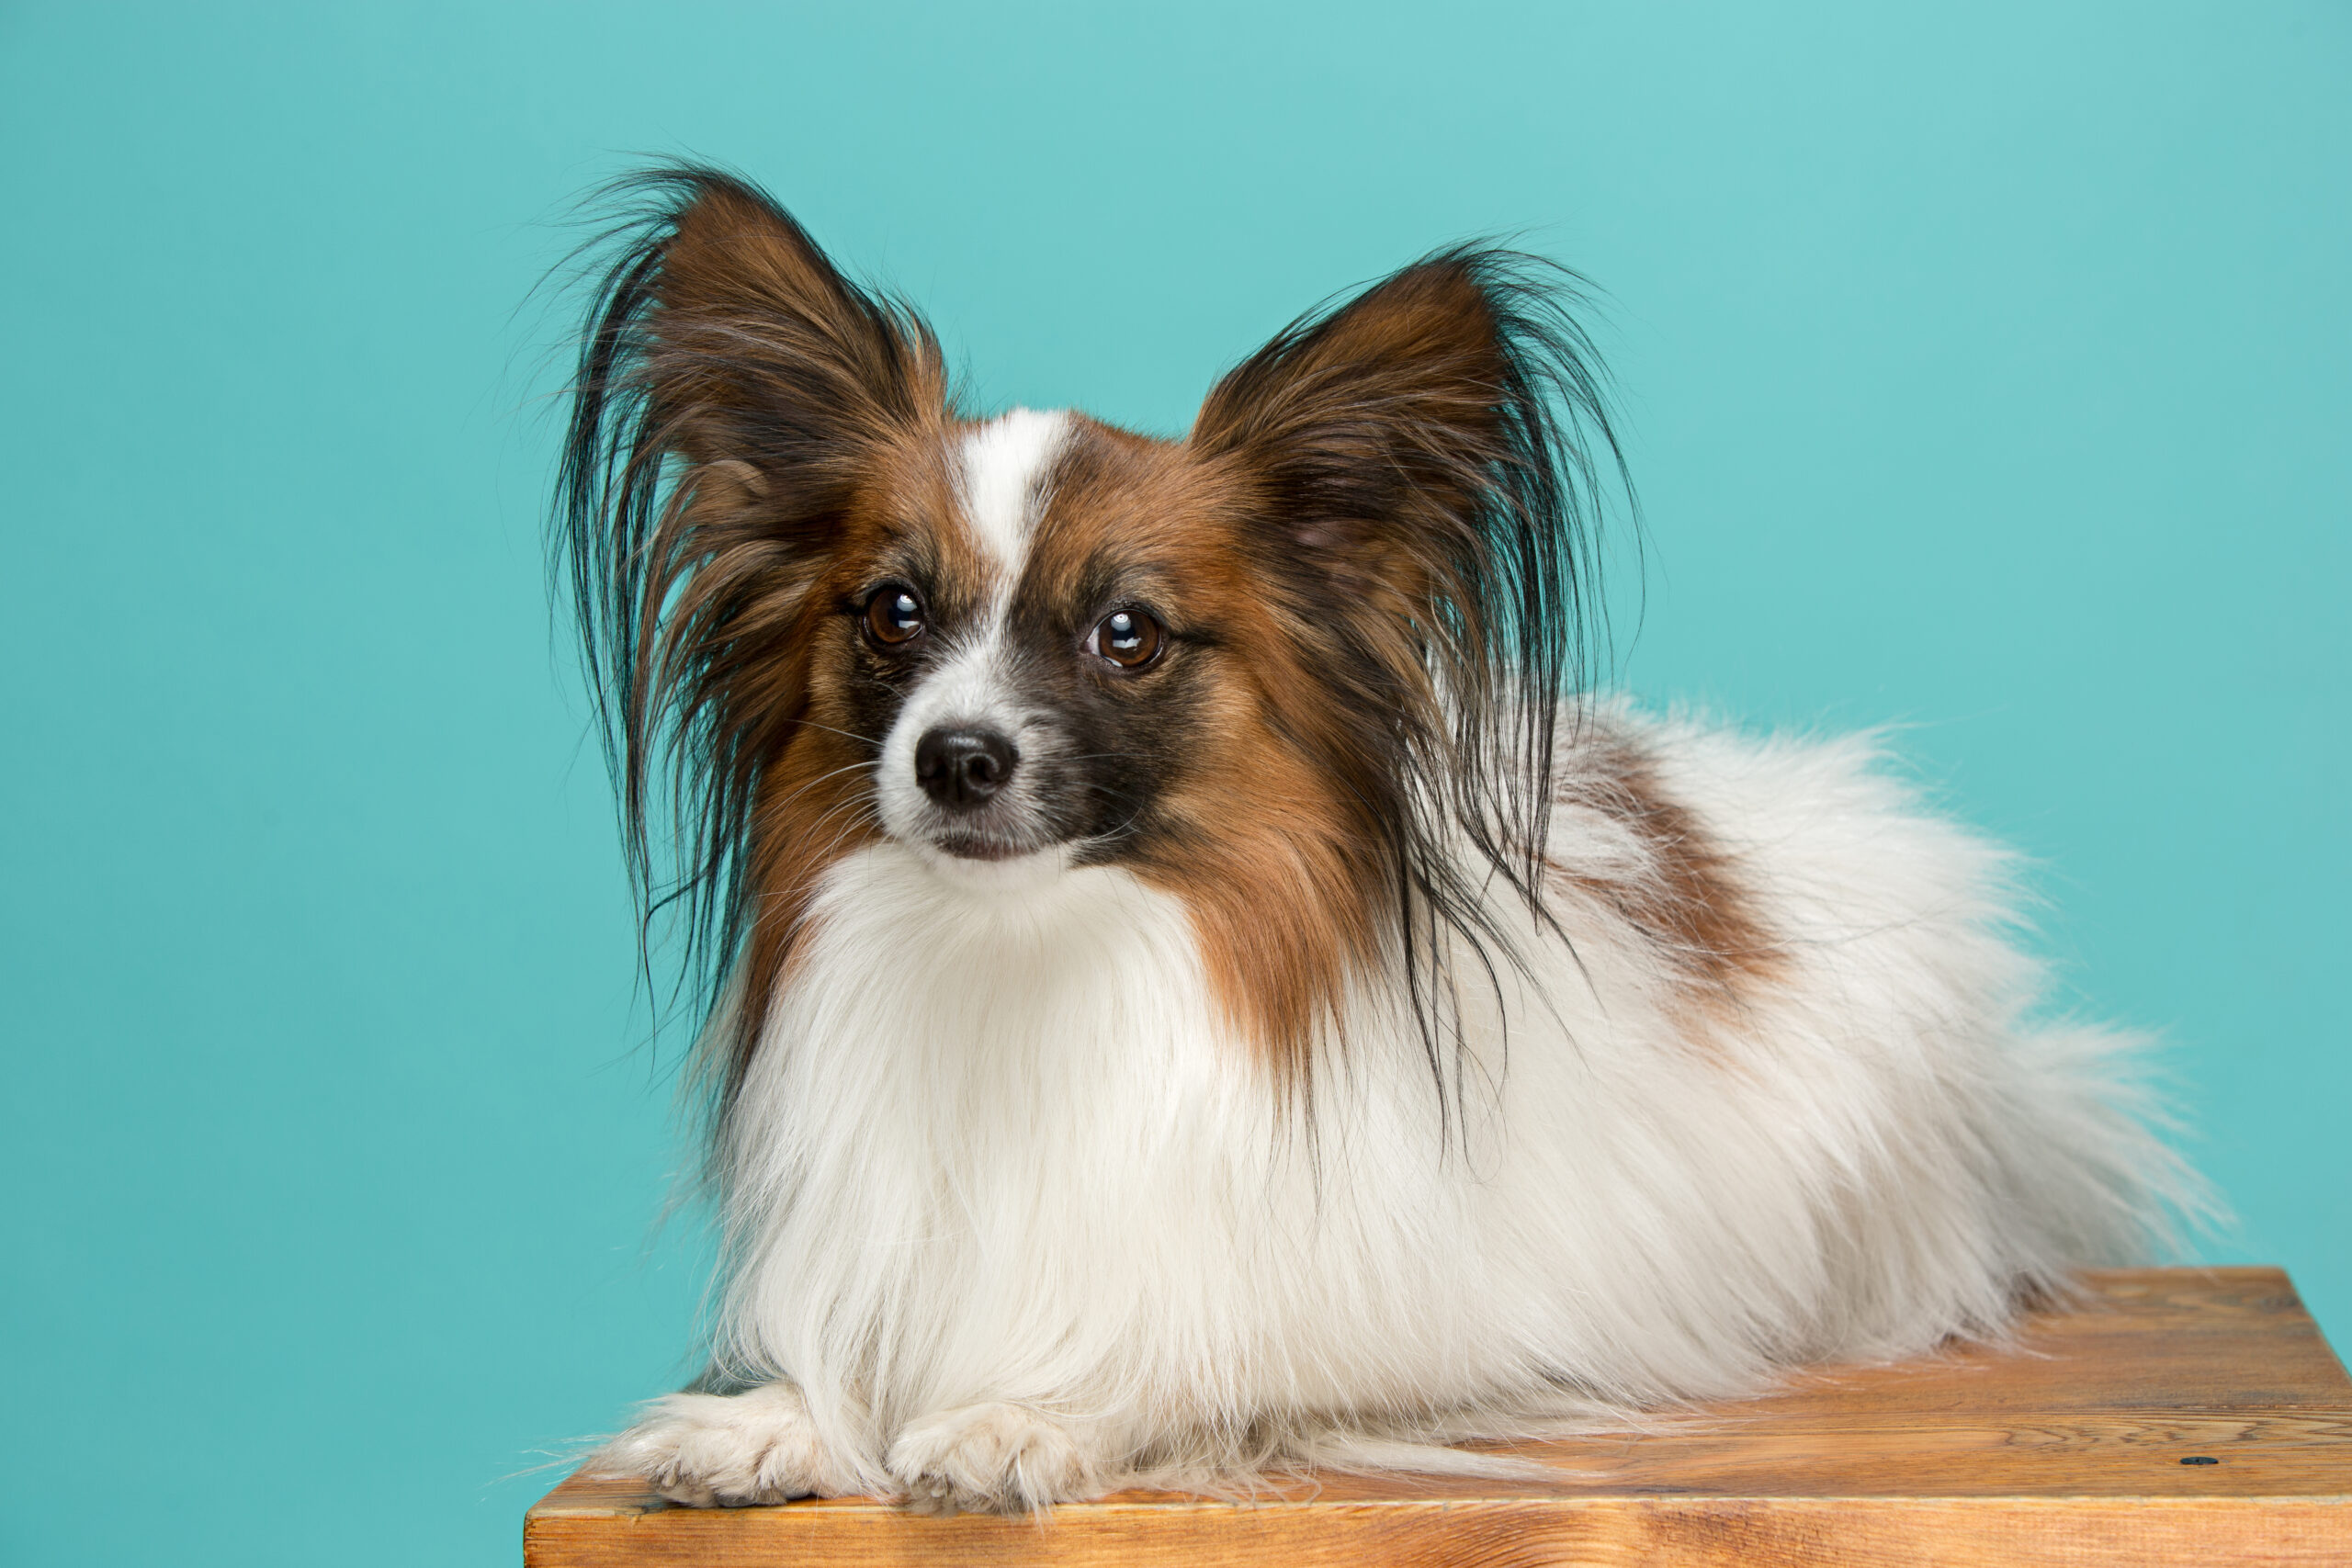 Studio portrait of a small yawning puppy Papillon on blue background